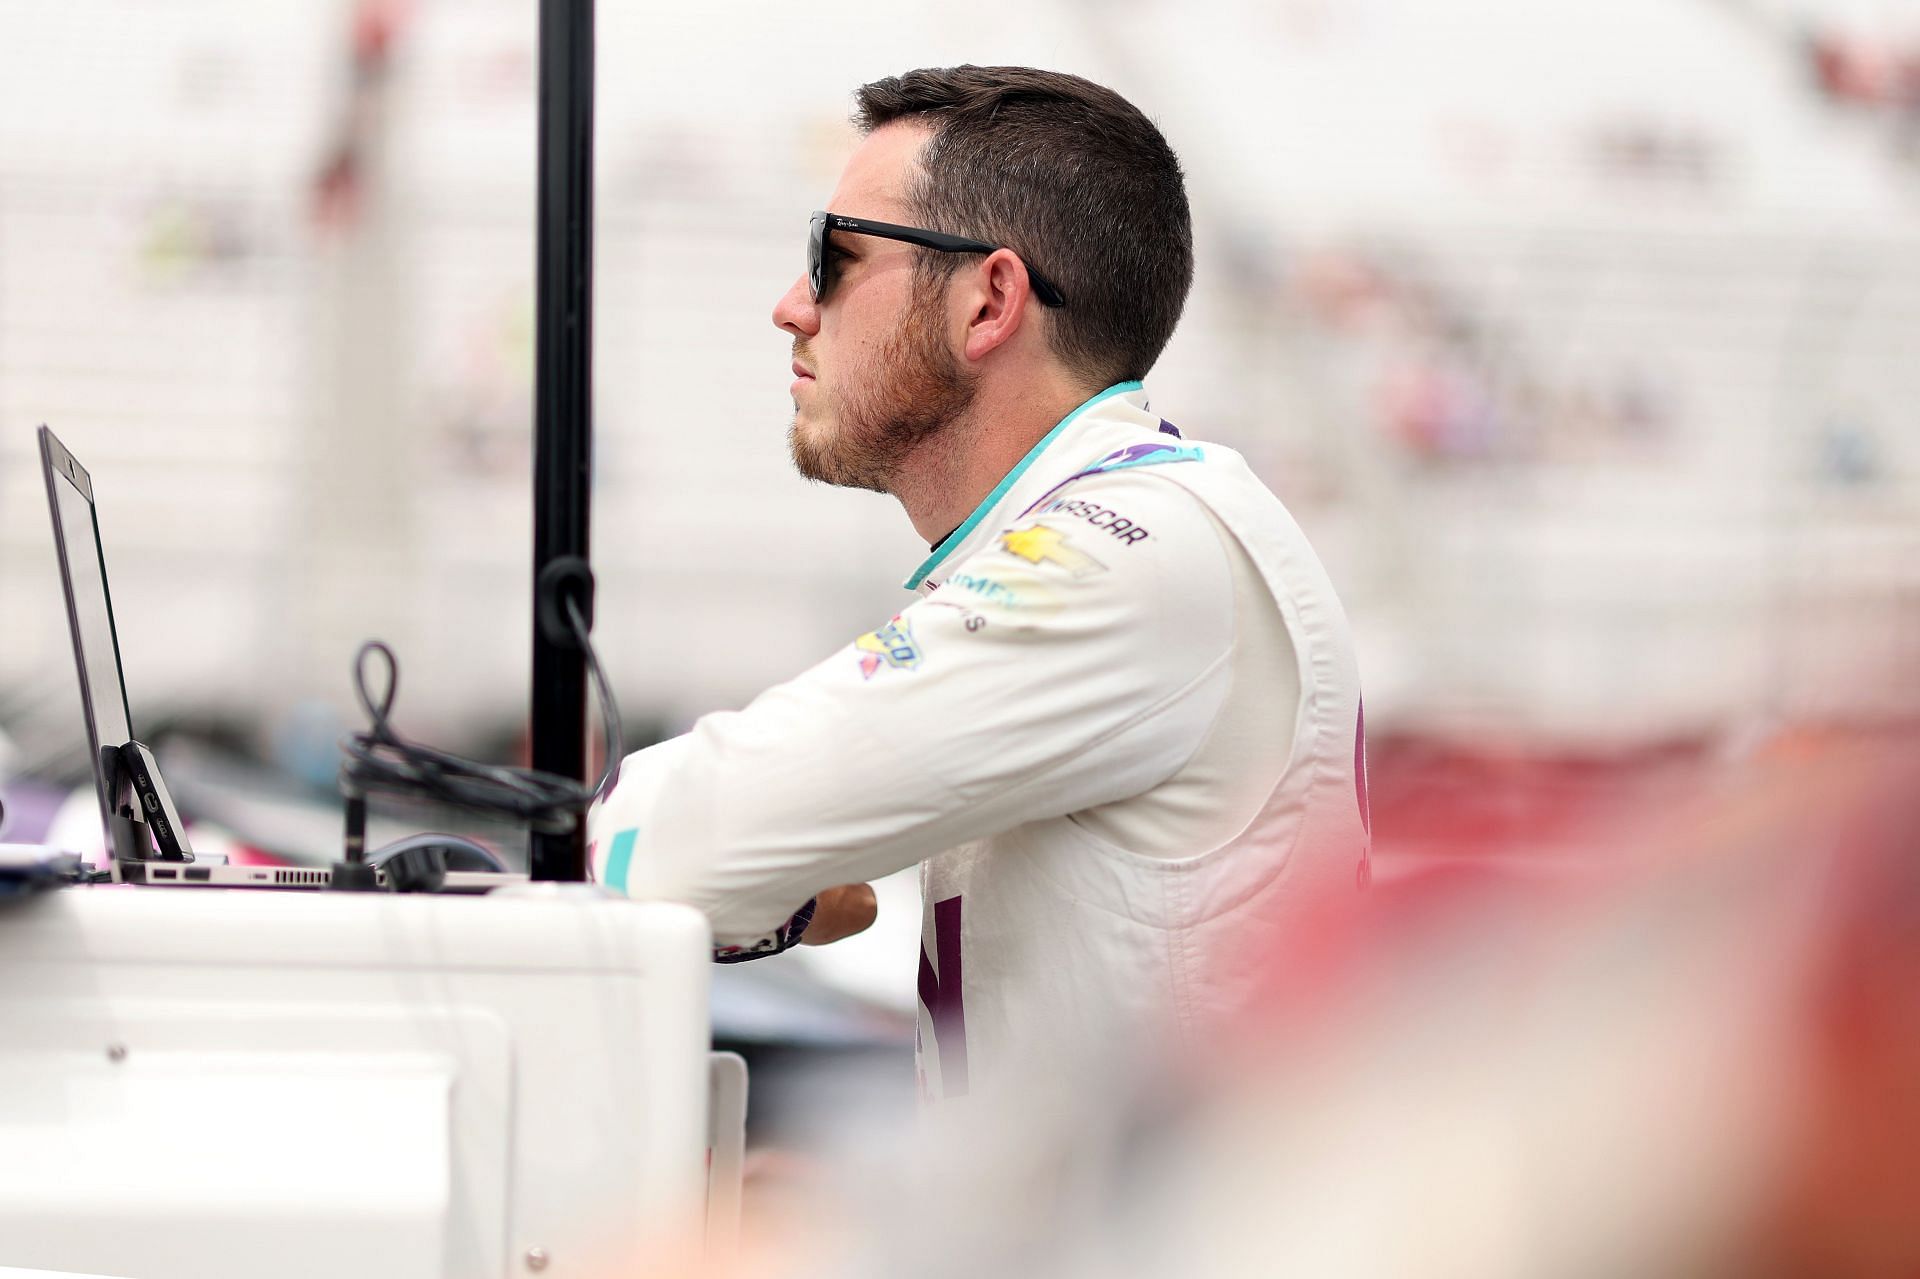 Alex Bowman looks on during practice for the 2022 NASCAR Cup Series Ambetter 301 at New Hampshire Motor Speedway in Loudon, New Hampshire. (Photo by James Gilbert/Getty Images)